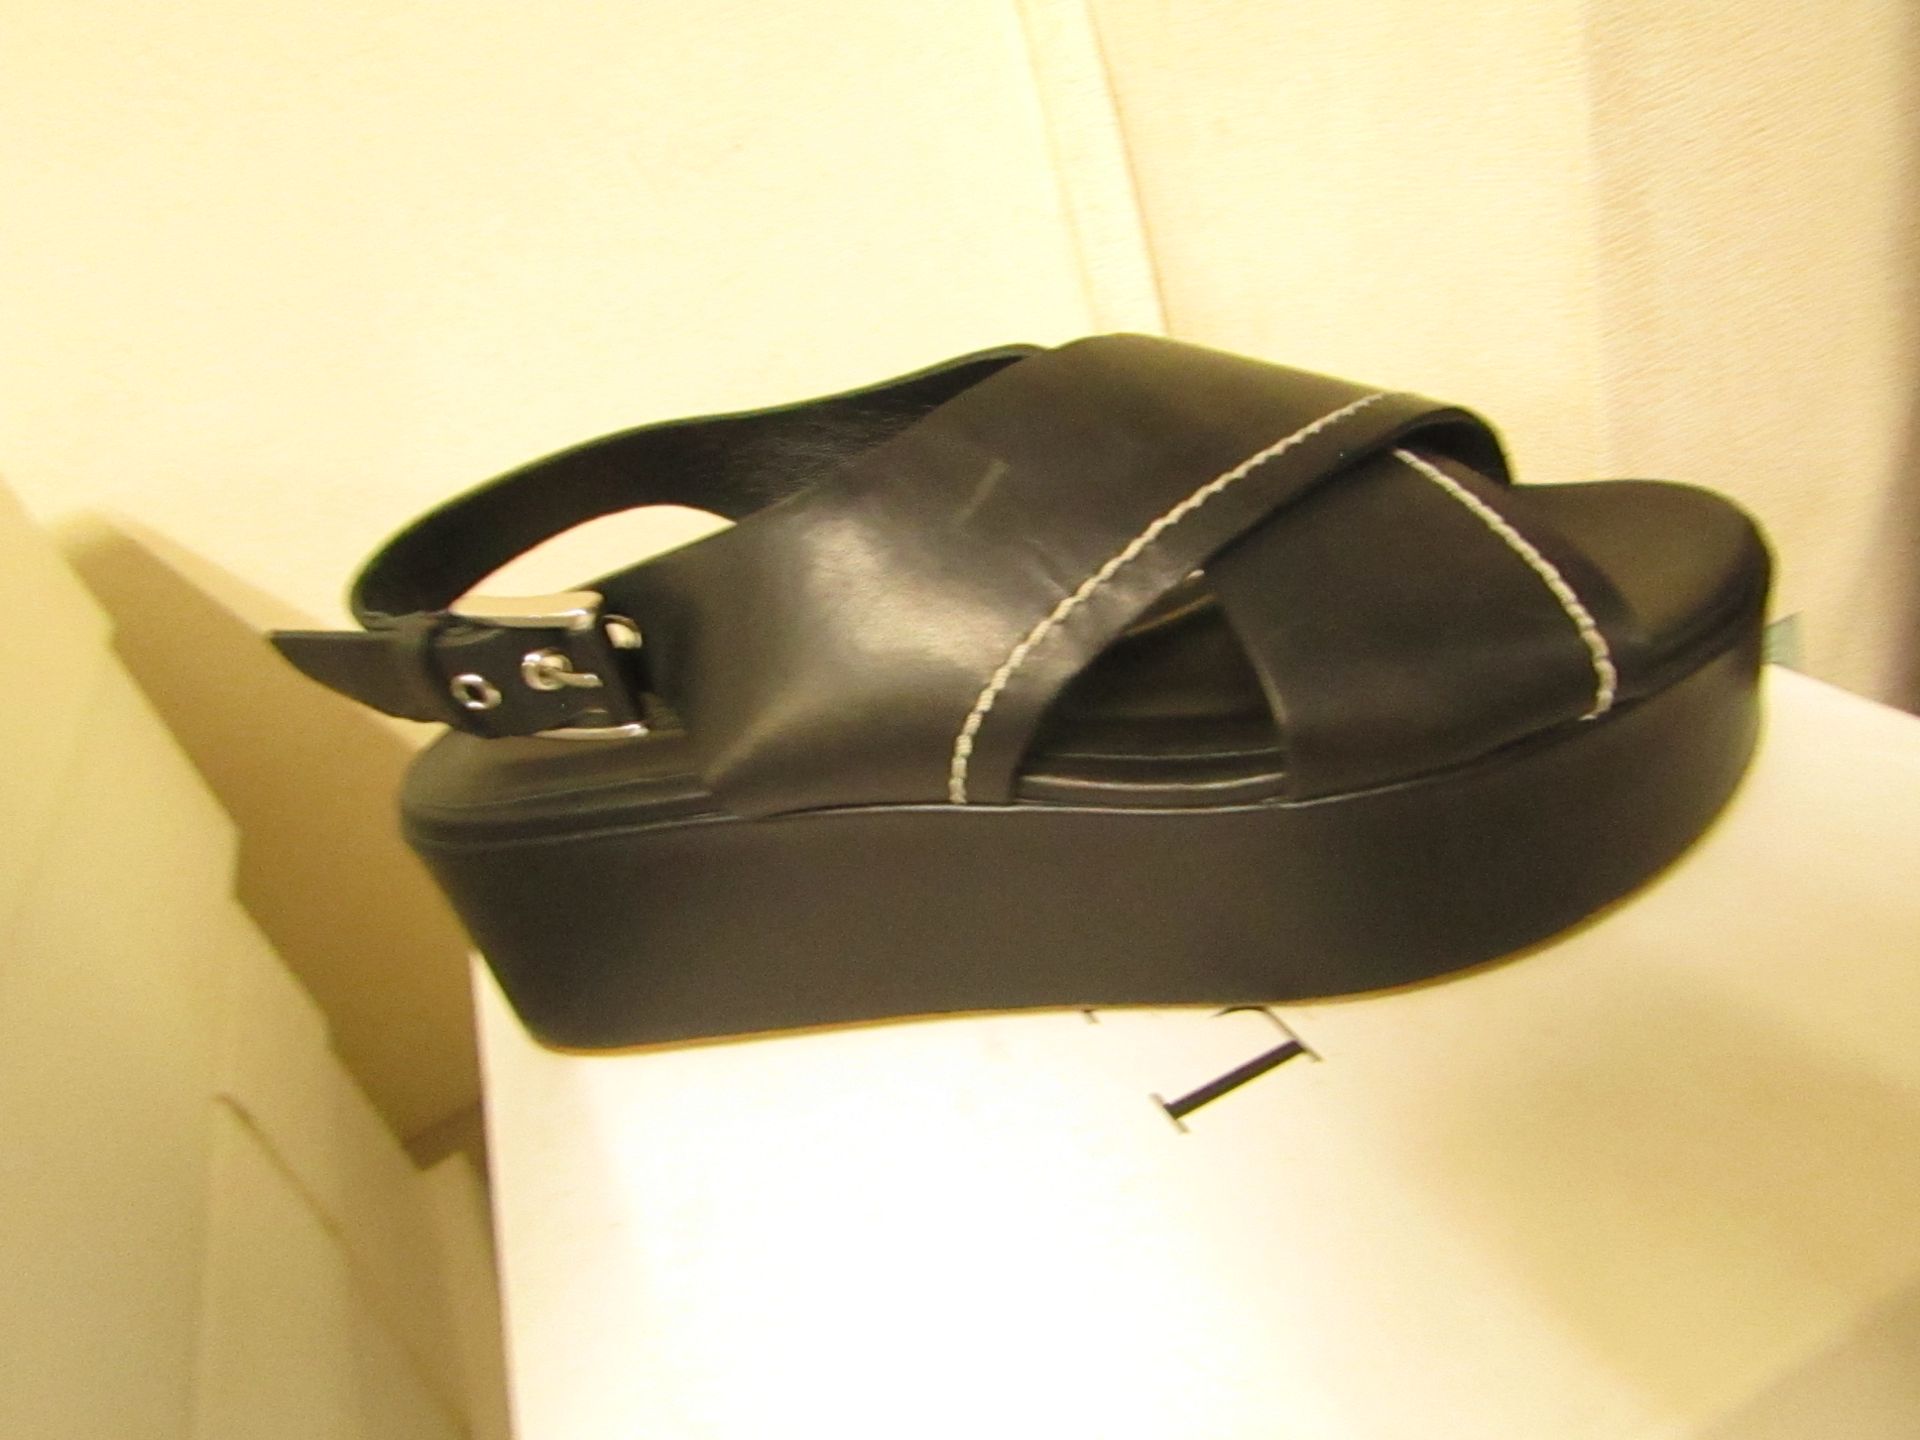 L K Bennett London Sima Black Veg Leather Shoes size 36 RRP £250 new & boxed see image for design